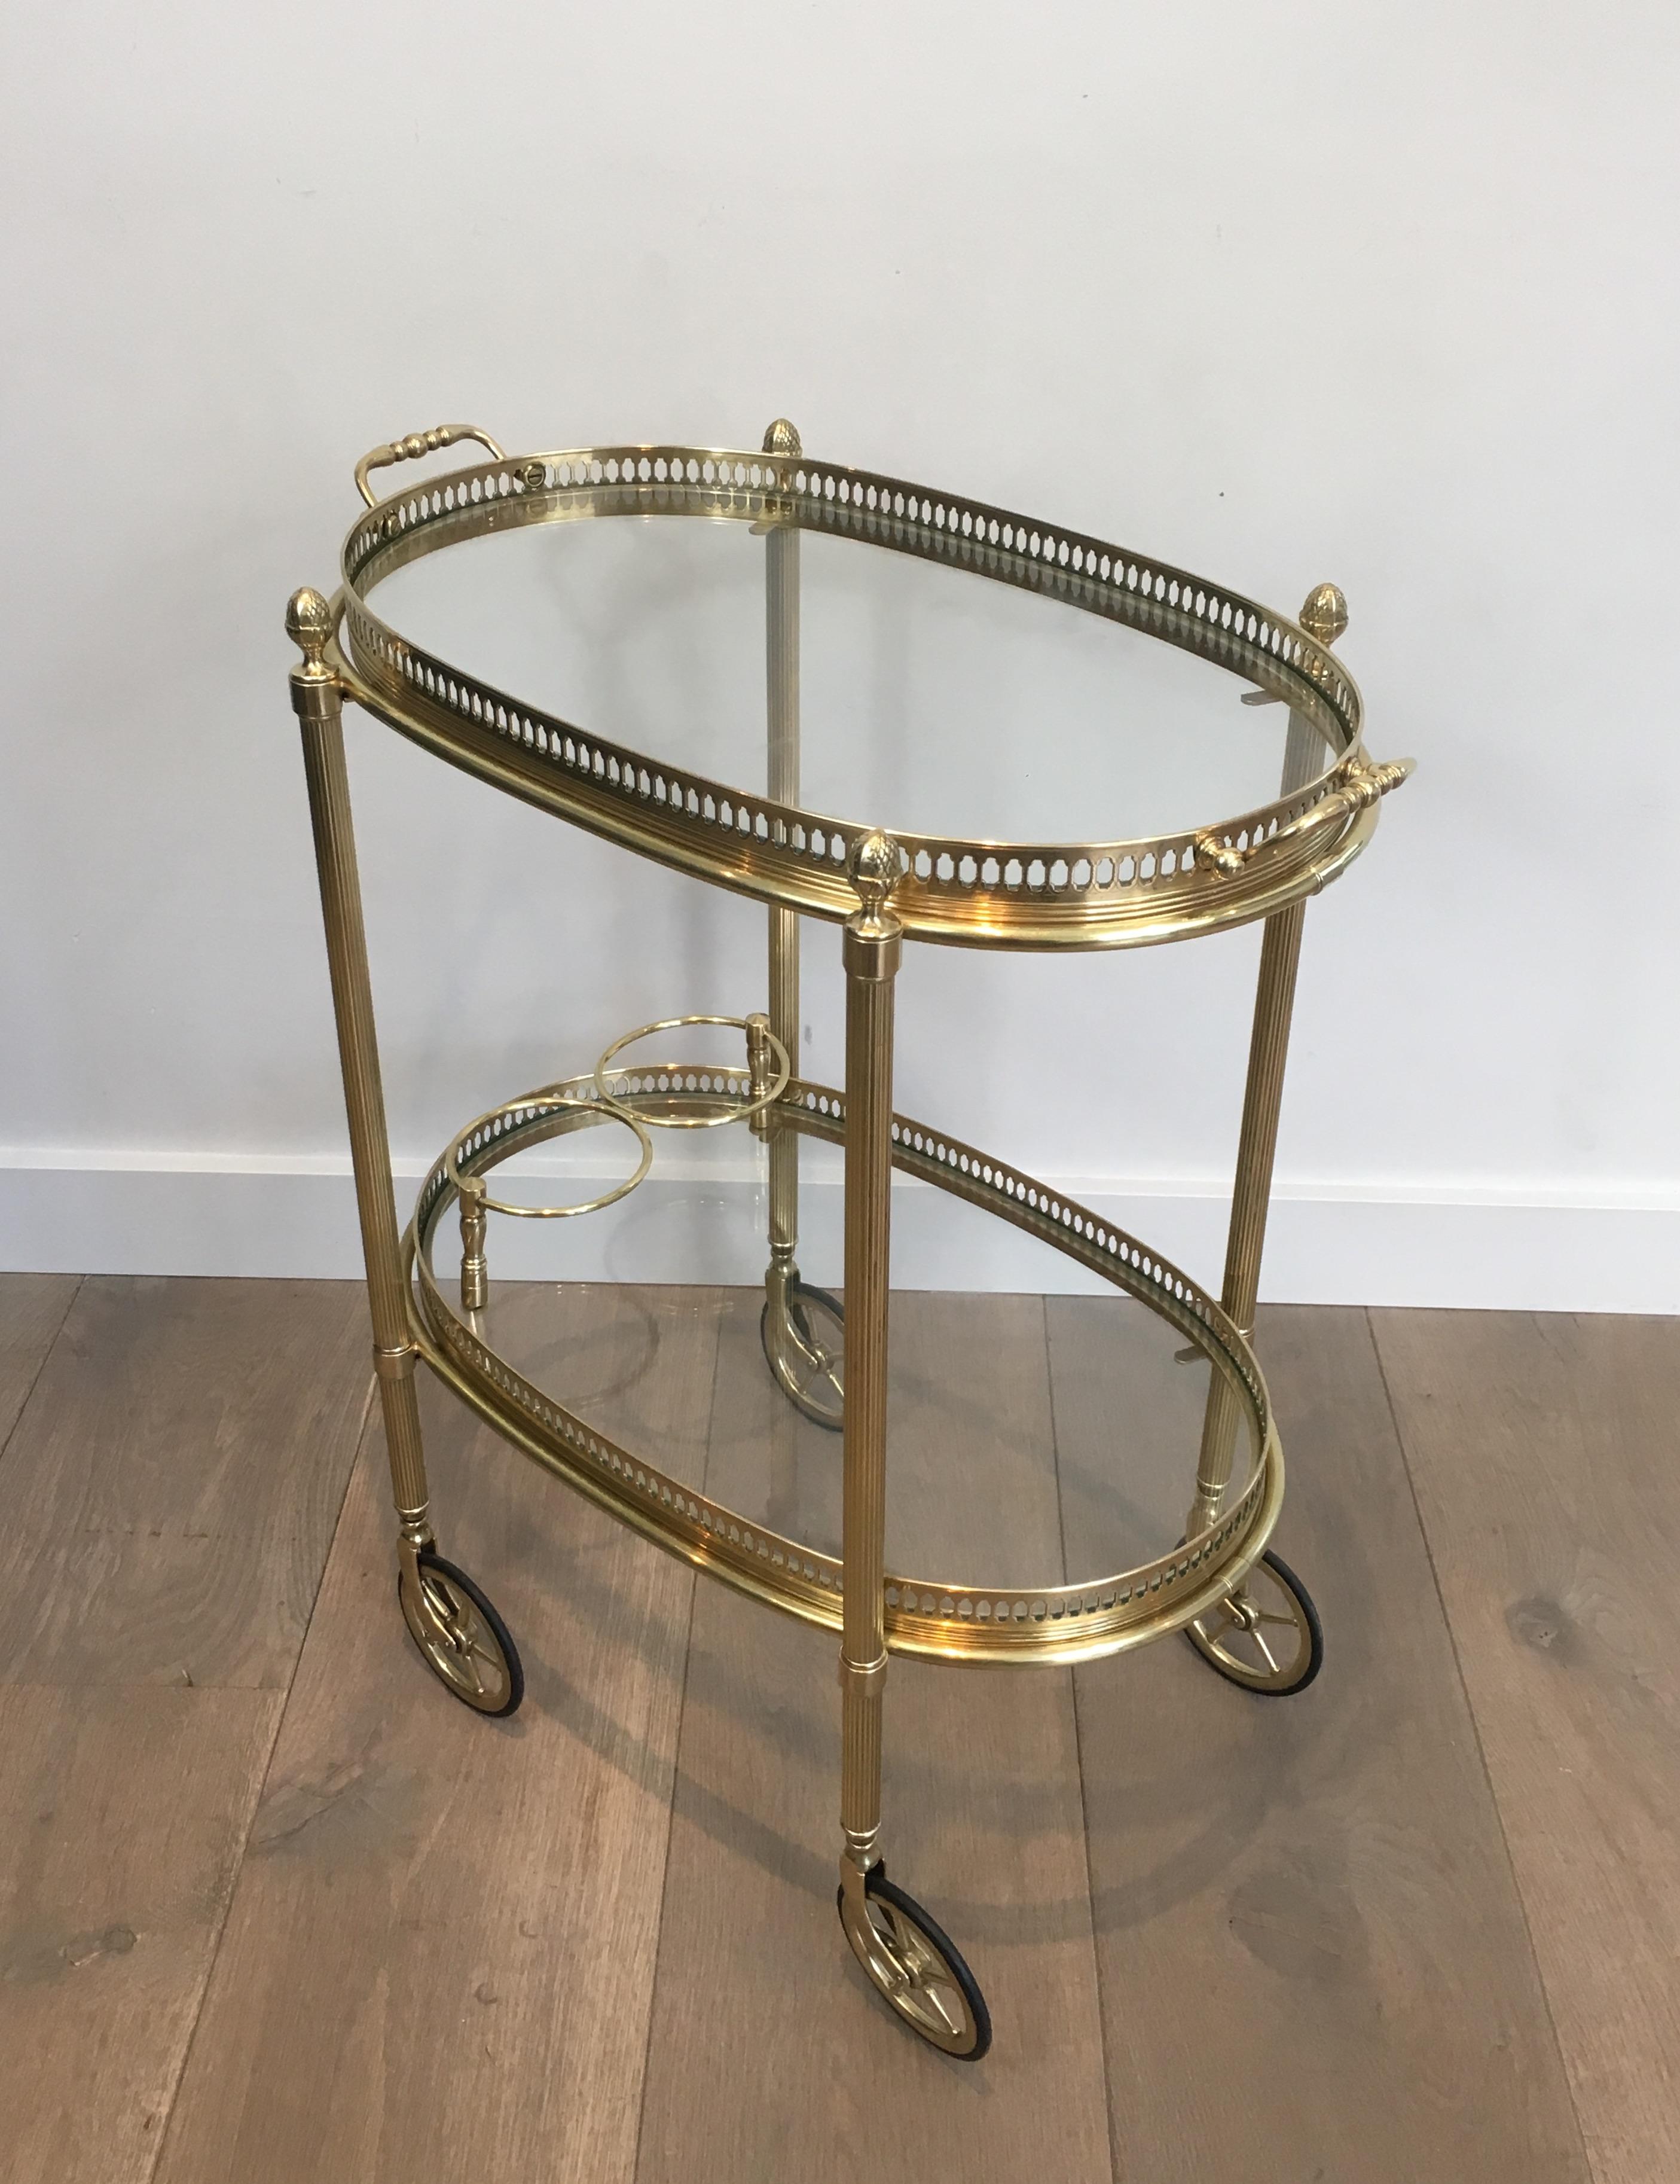 This very nice neoclassical style oval bar cart is made of brass with clear glass shelves. This drinks trolley is very delicate with a Fine gallery surrounded the glass shelves. It has 2 removable trays. This is a nice work by famous French designer